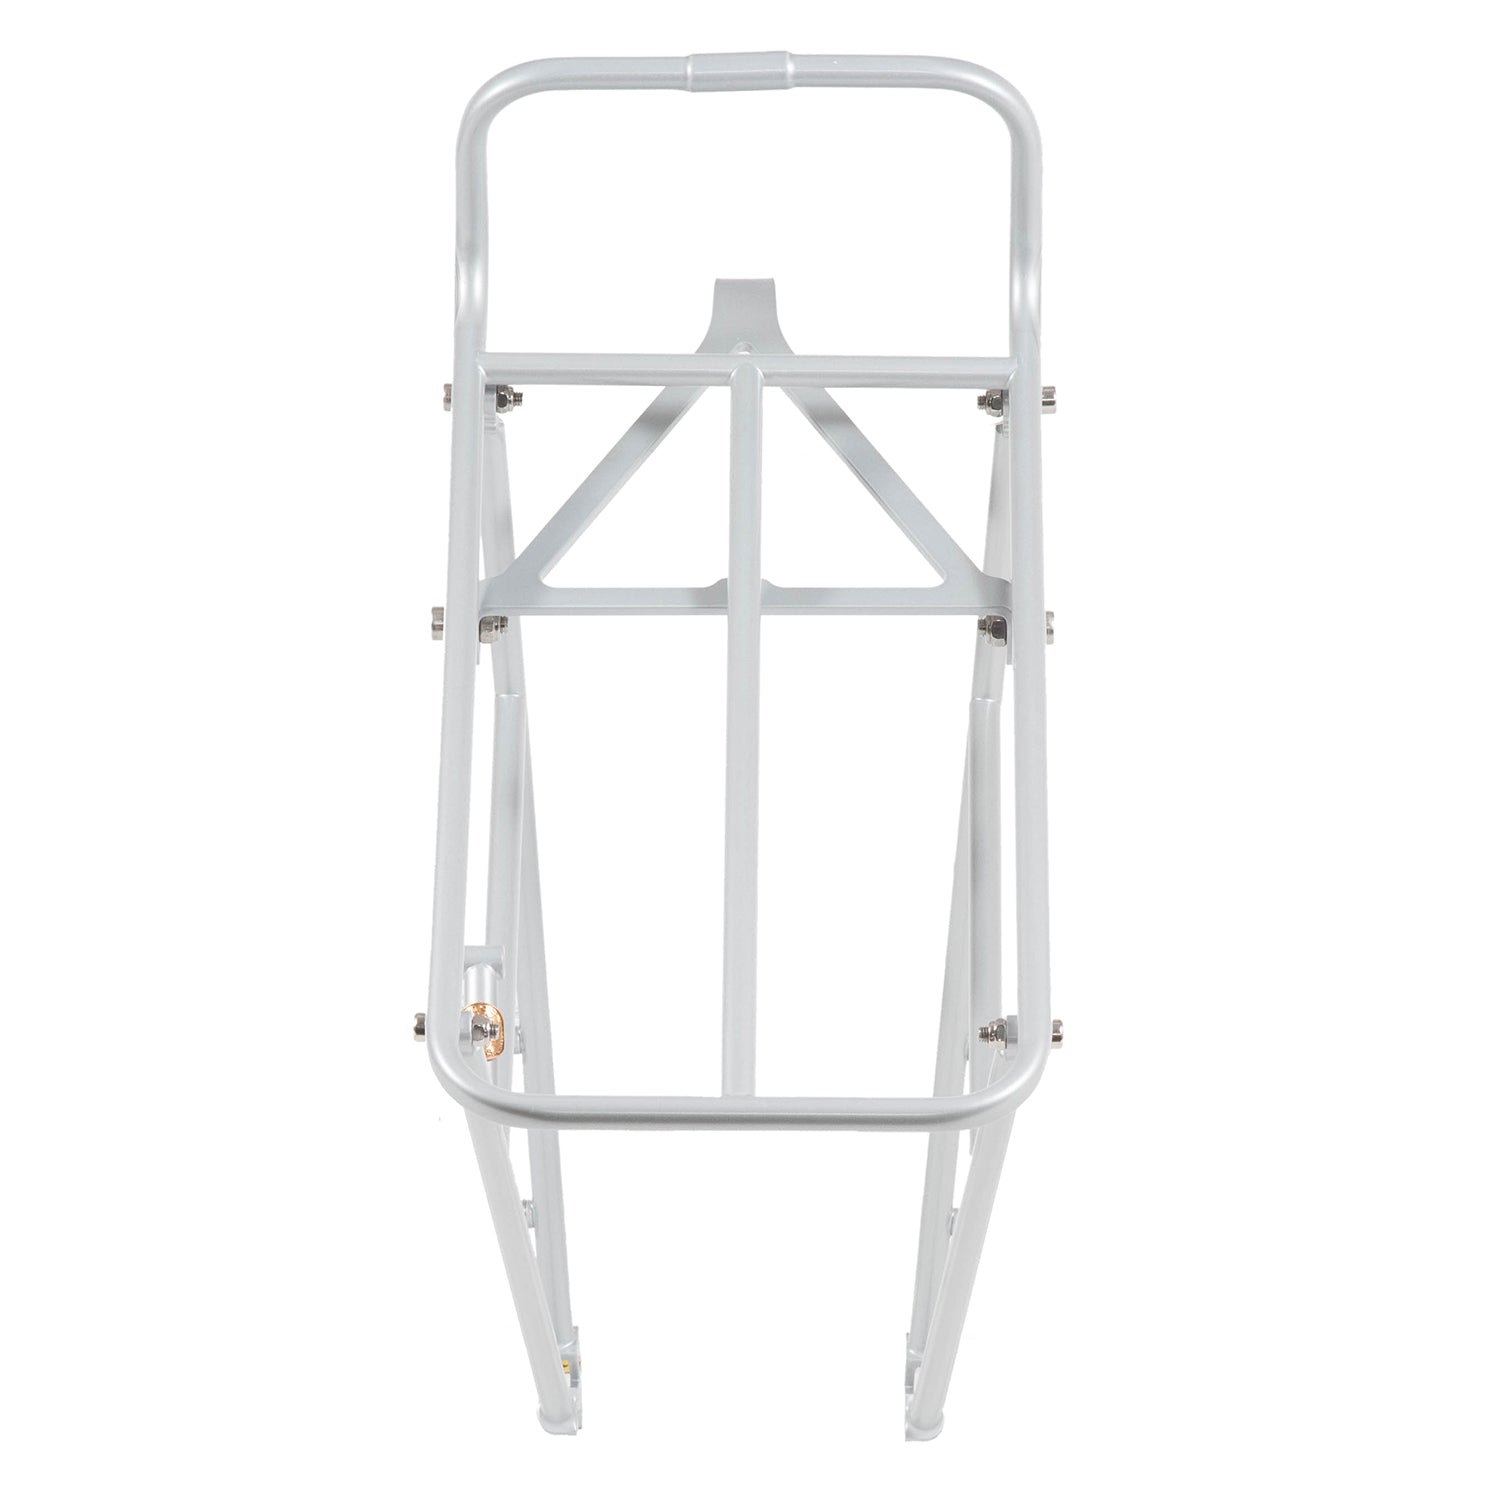 PASS AND STOW 3 Rail Rack (Cargo Cage)